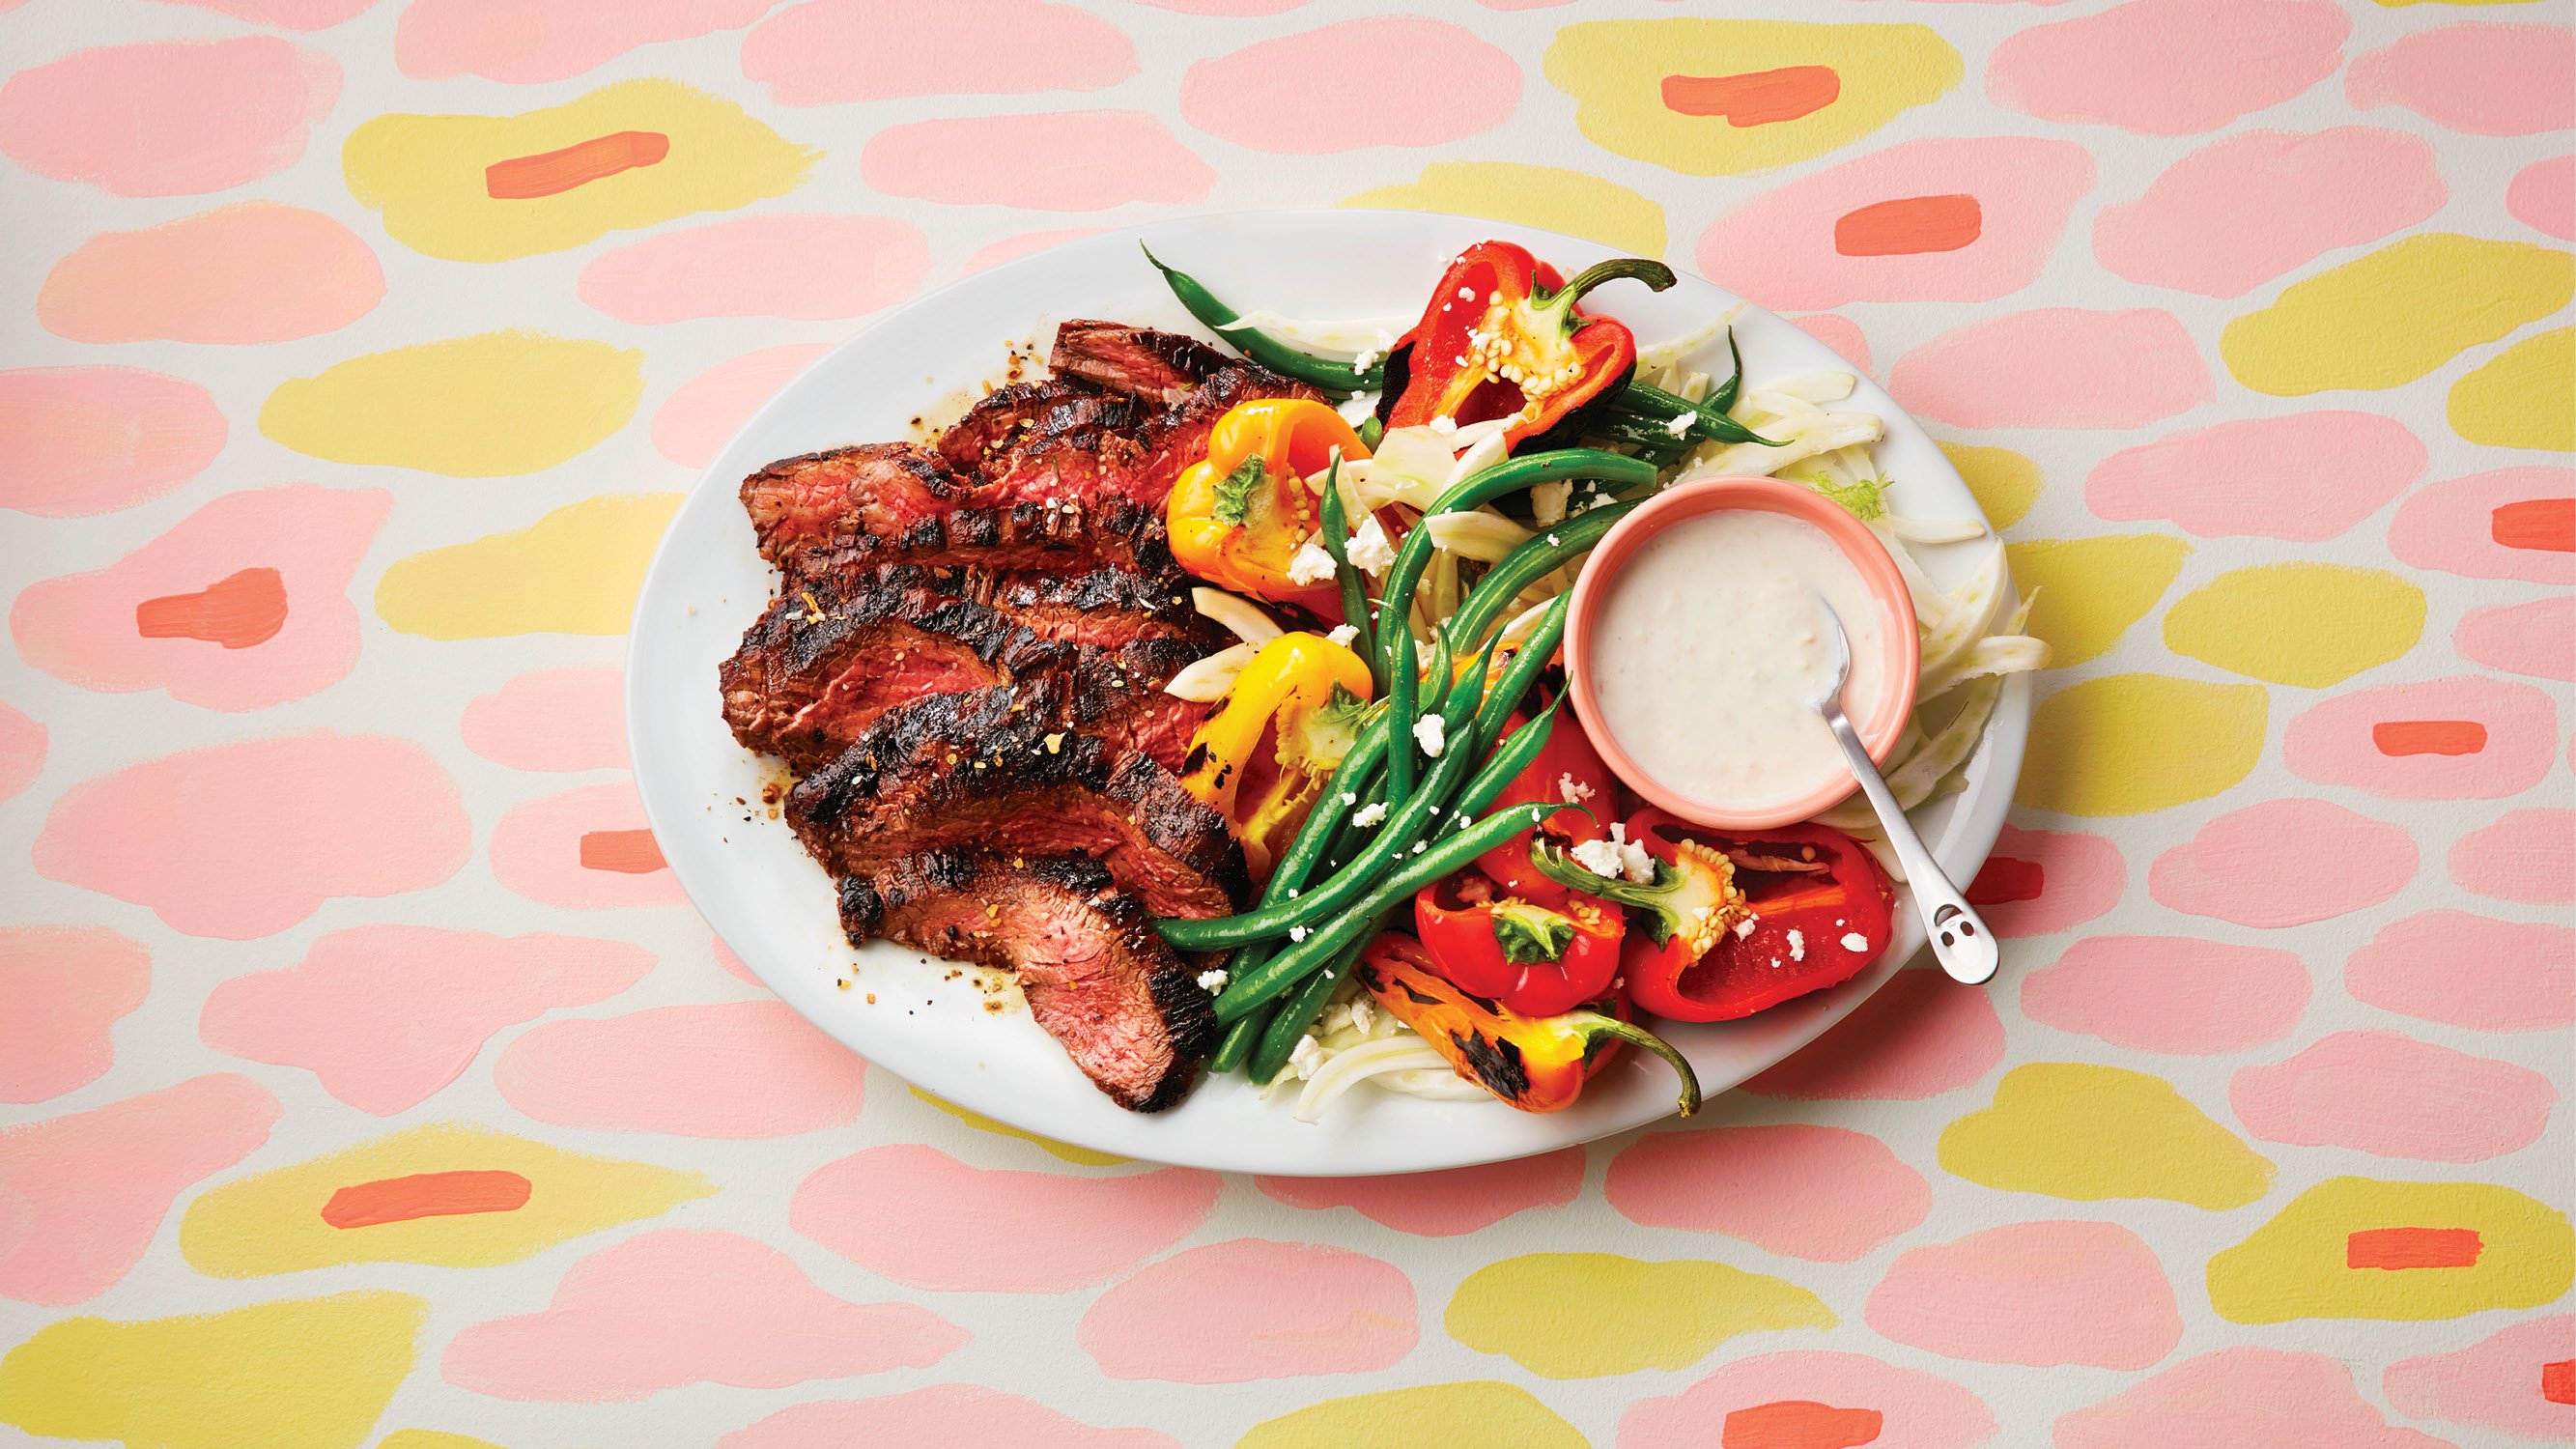 late summer recipe of plate with grilled flank steak, green beans, peppers and a yogurt dipping sauce on a patterned table cloth